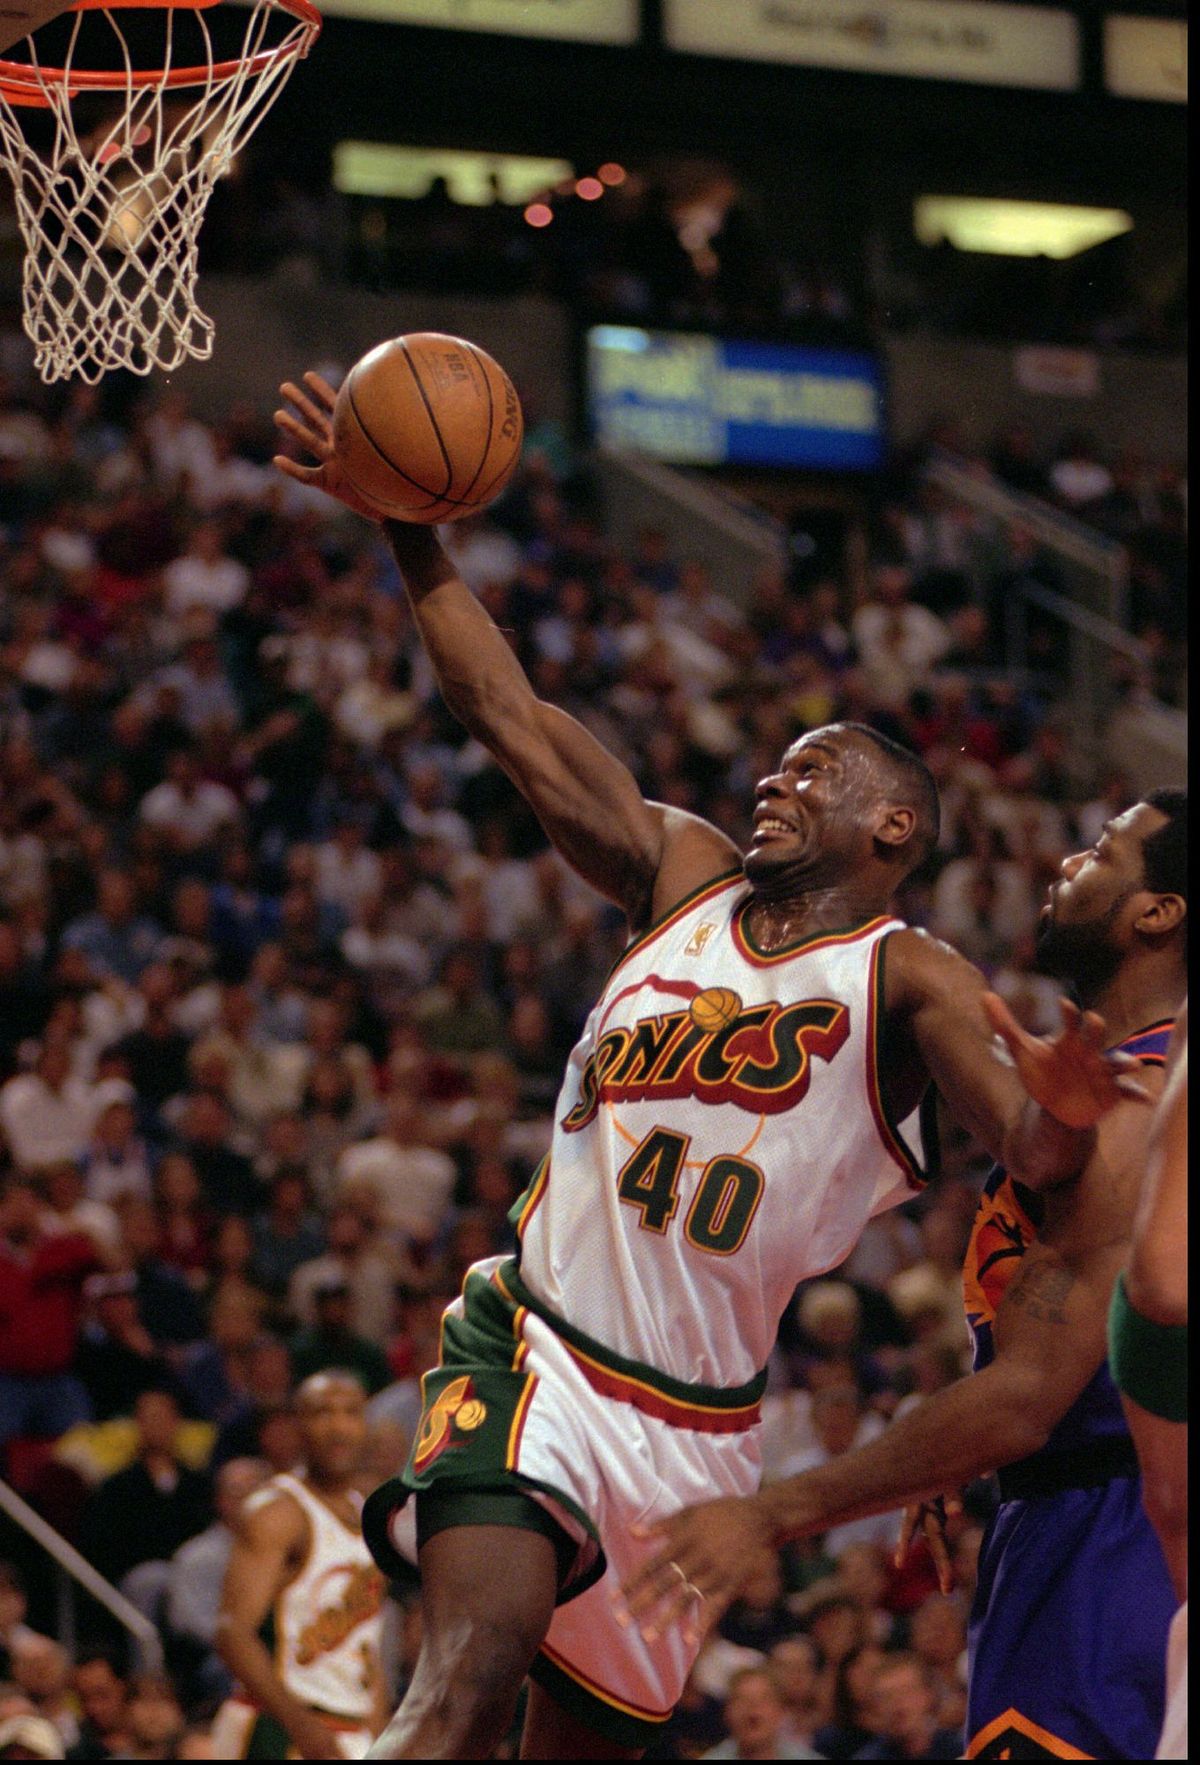 Shawn Kemp: Supersonics were taken from us behind our backs